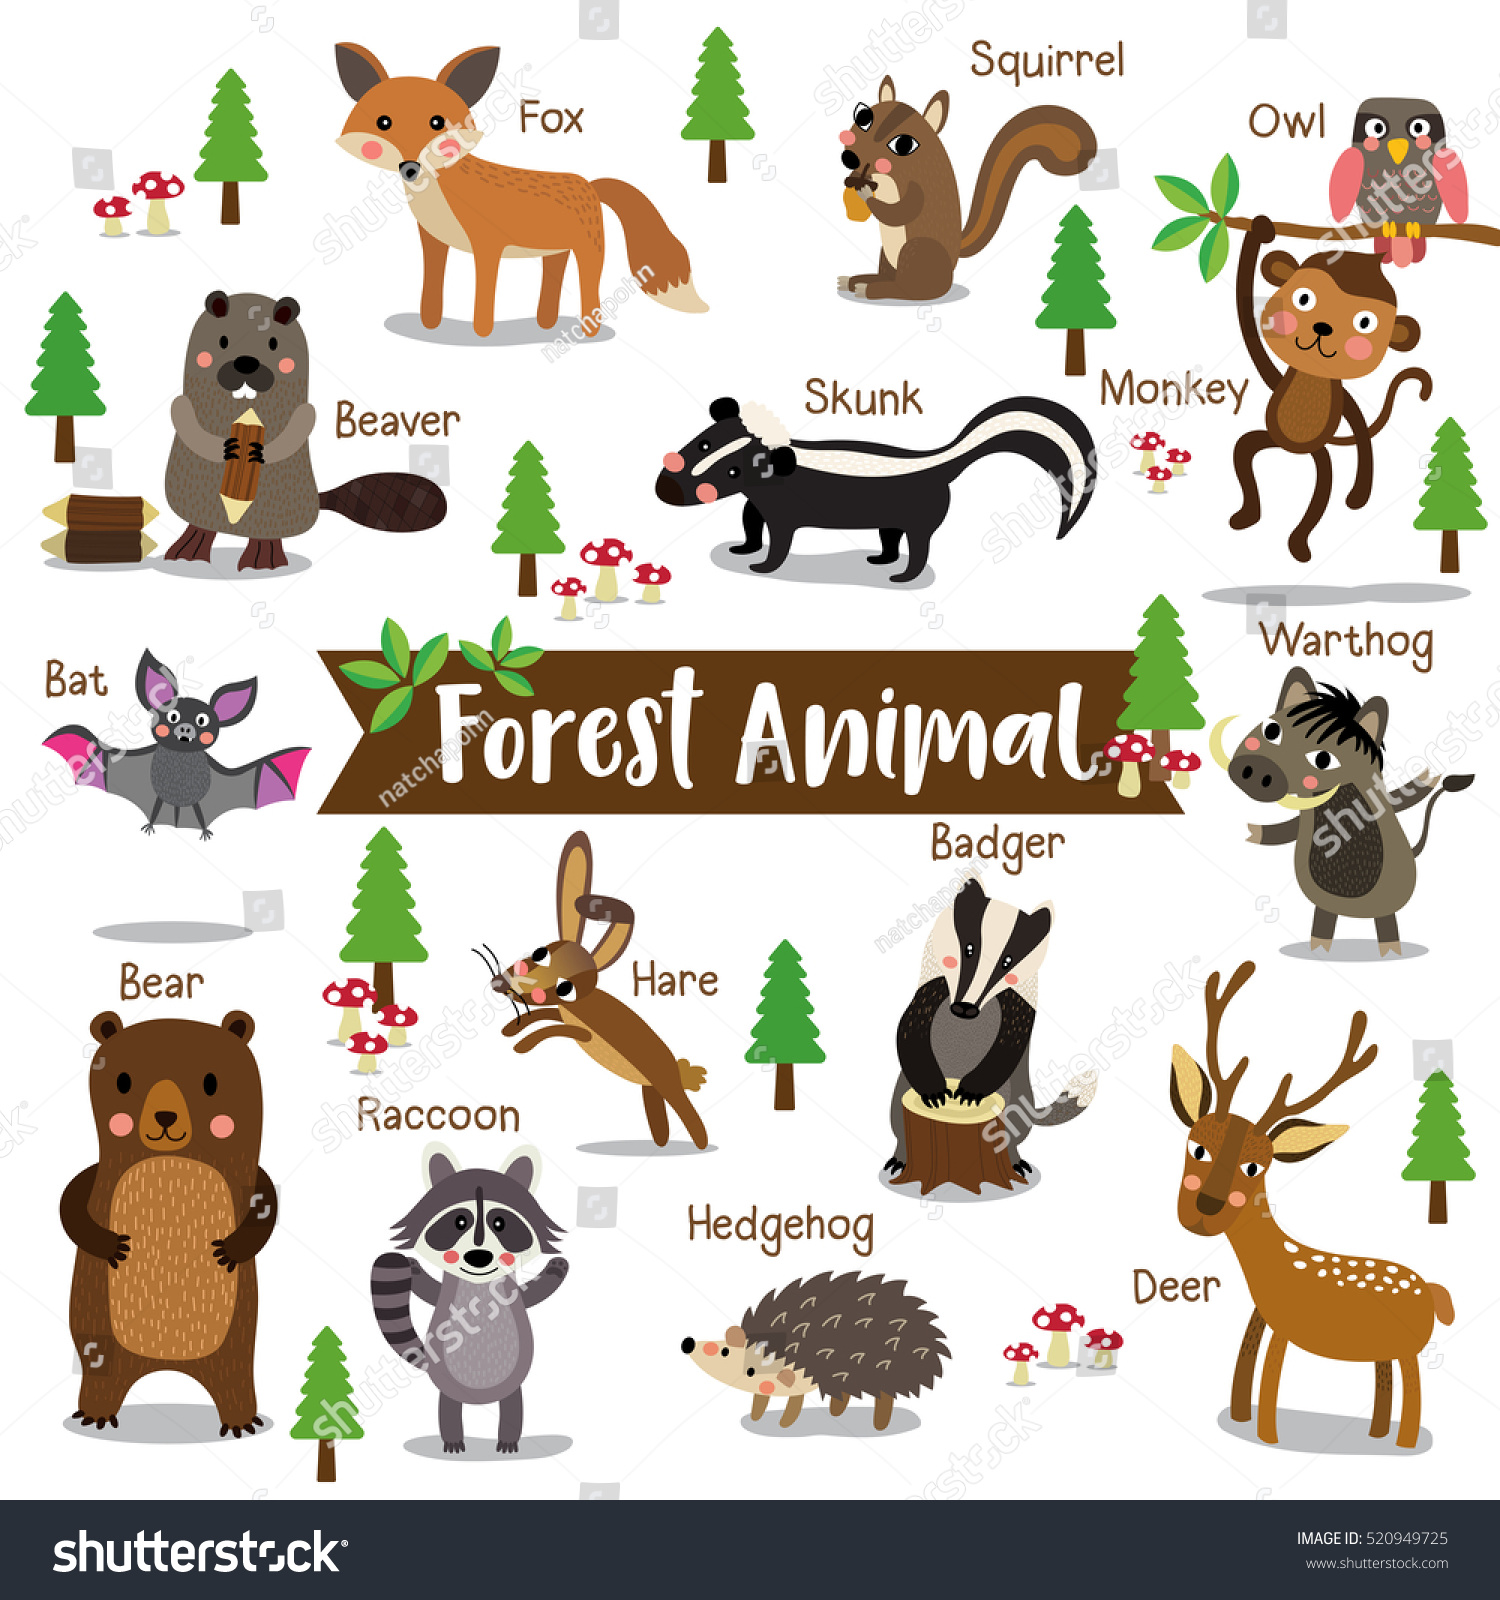 Forest Animal Cartoon On White Background With Animal Name. Stock ...